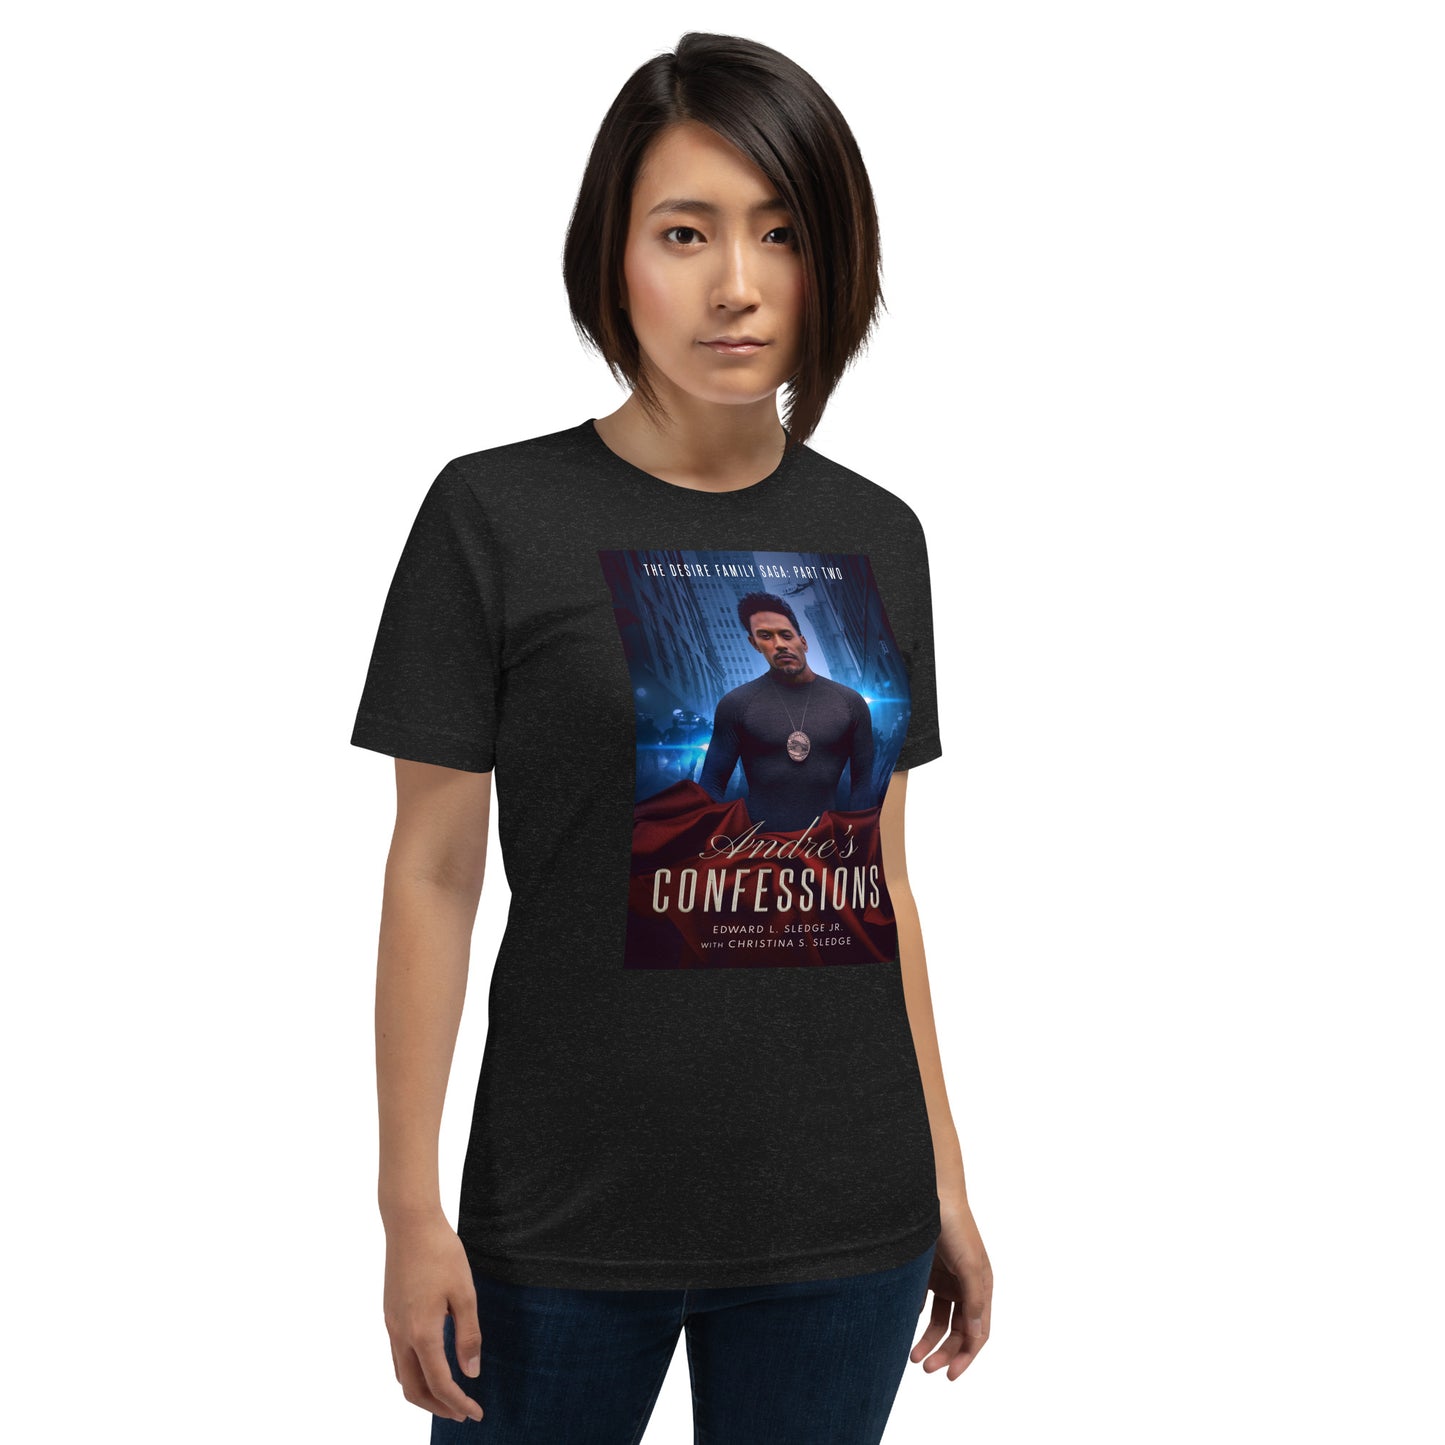 Andre's Confessions Unisex Graphic T-Shirt